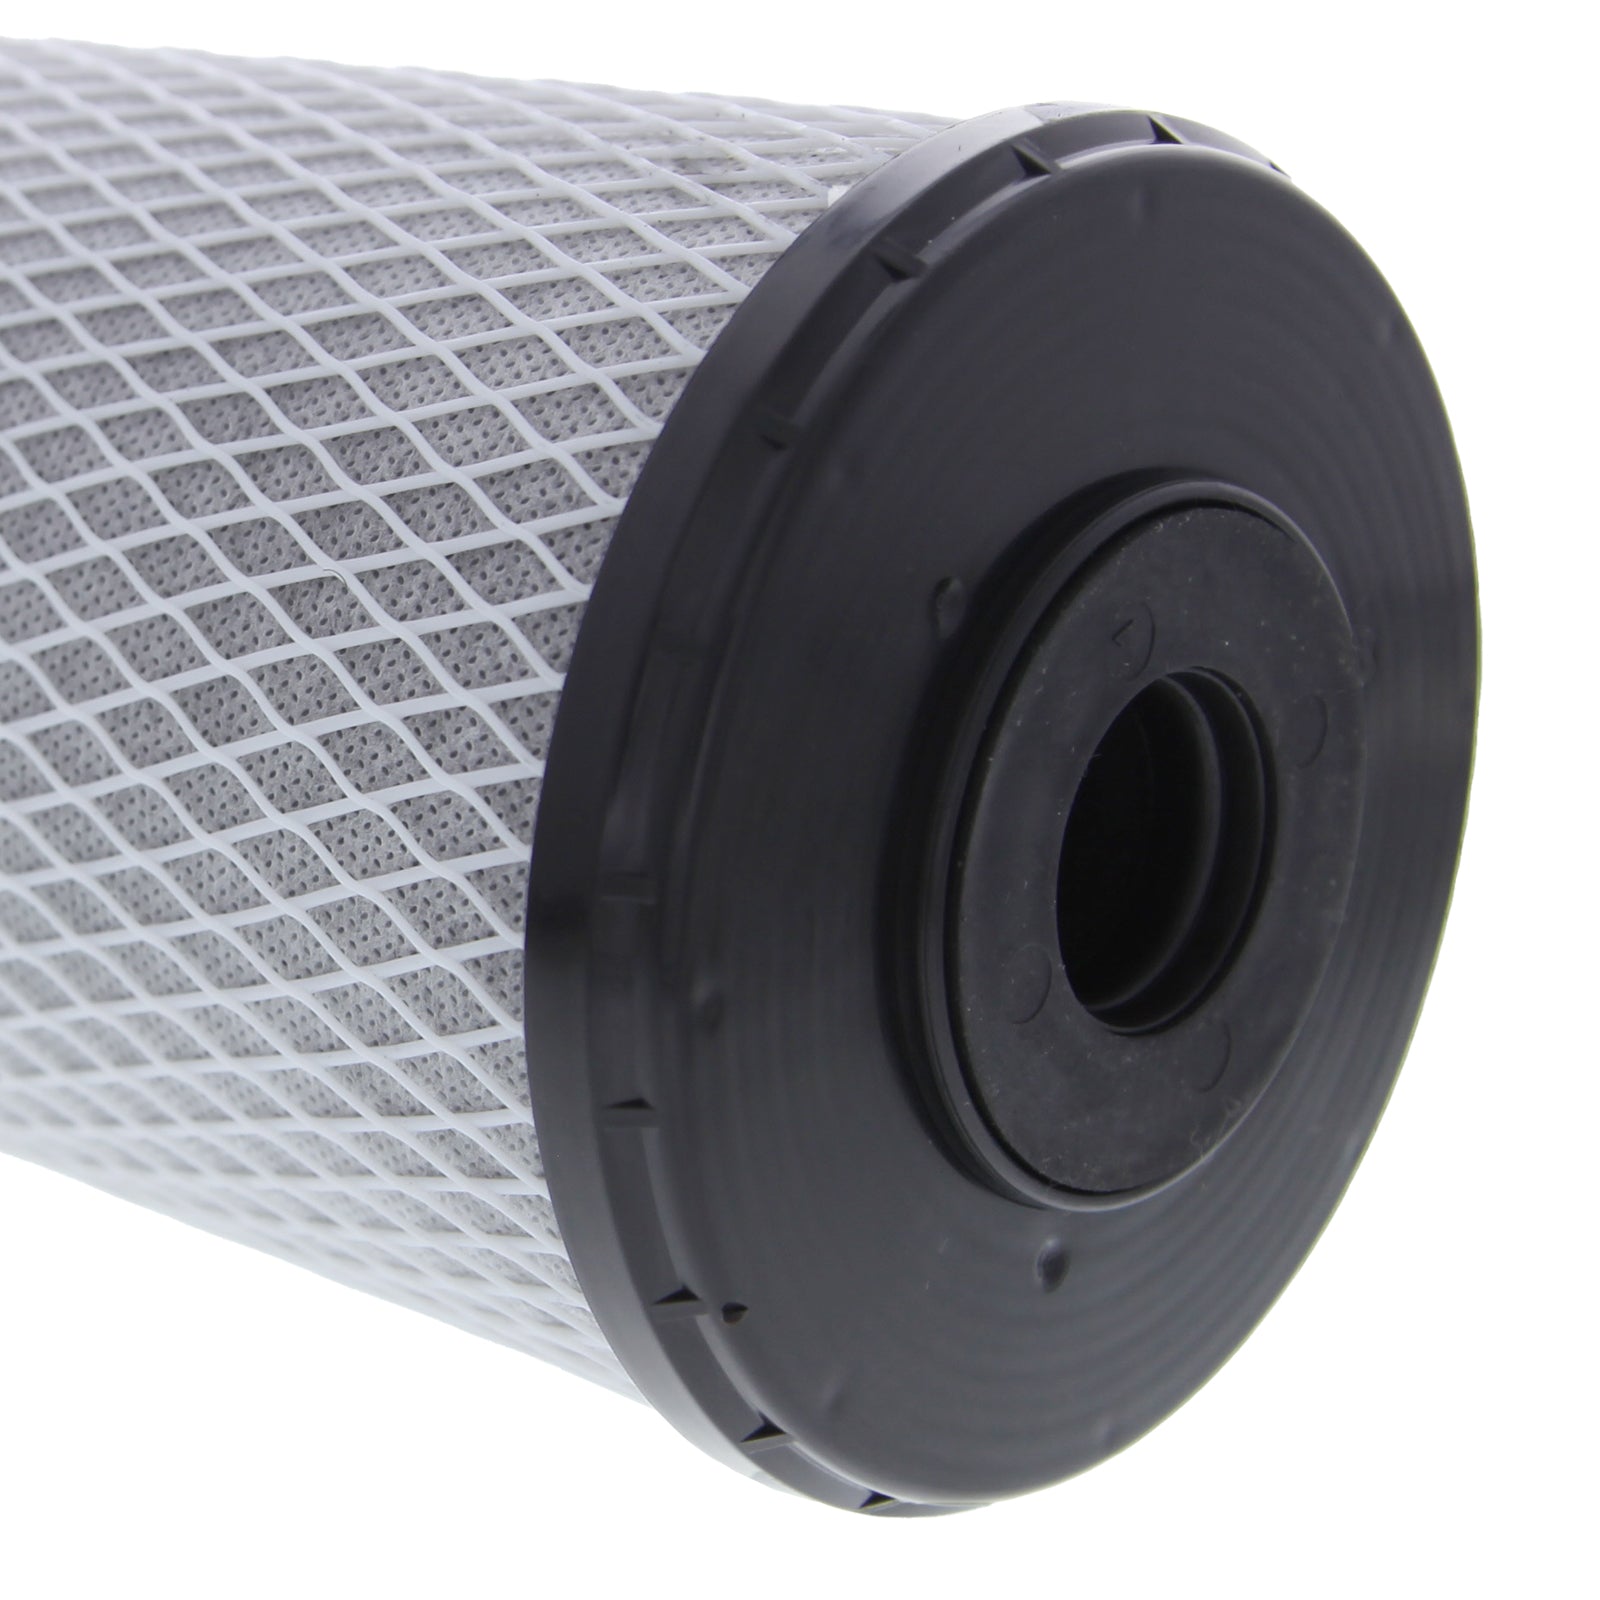 Lead Reducing Carbon Block Filter by USWF 0.5 Micron 20"x4.5"